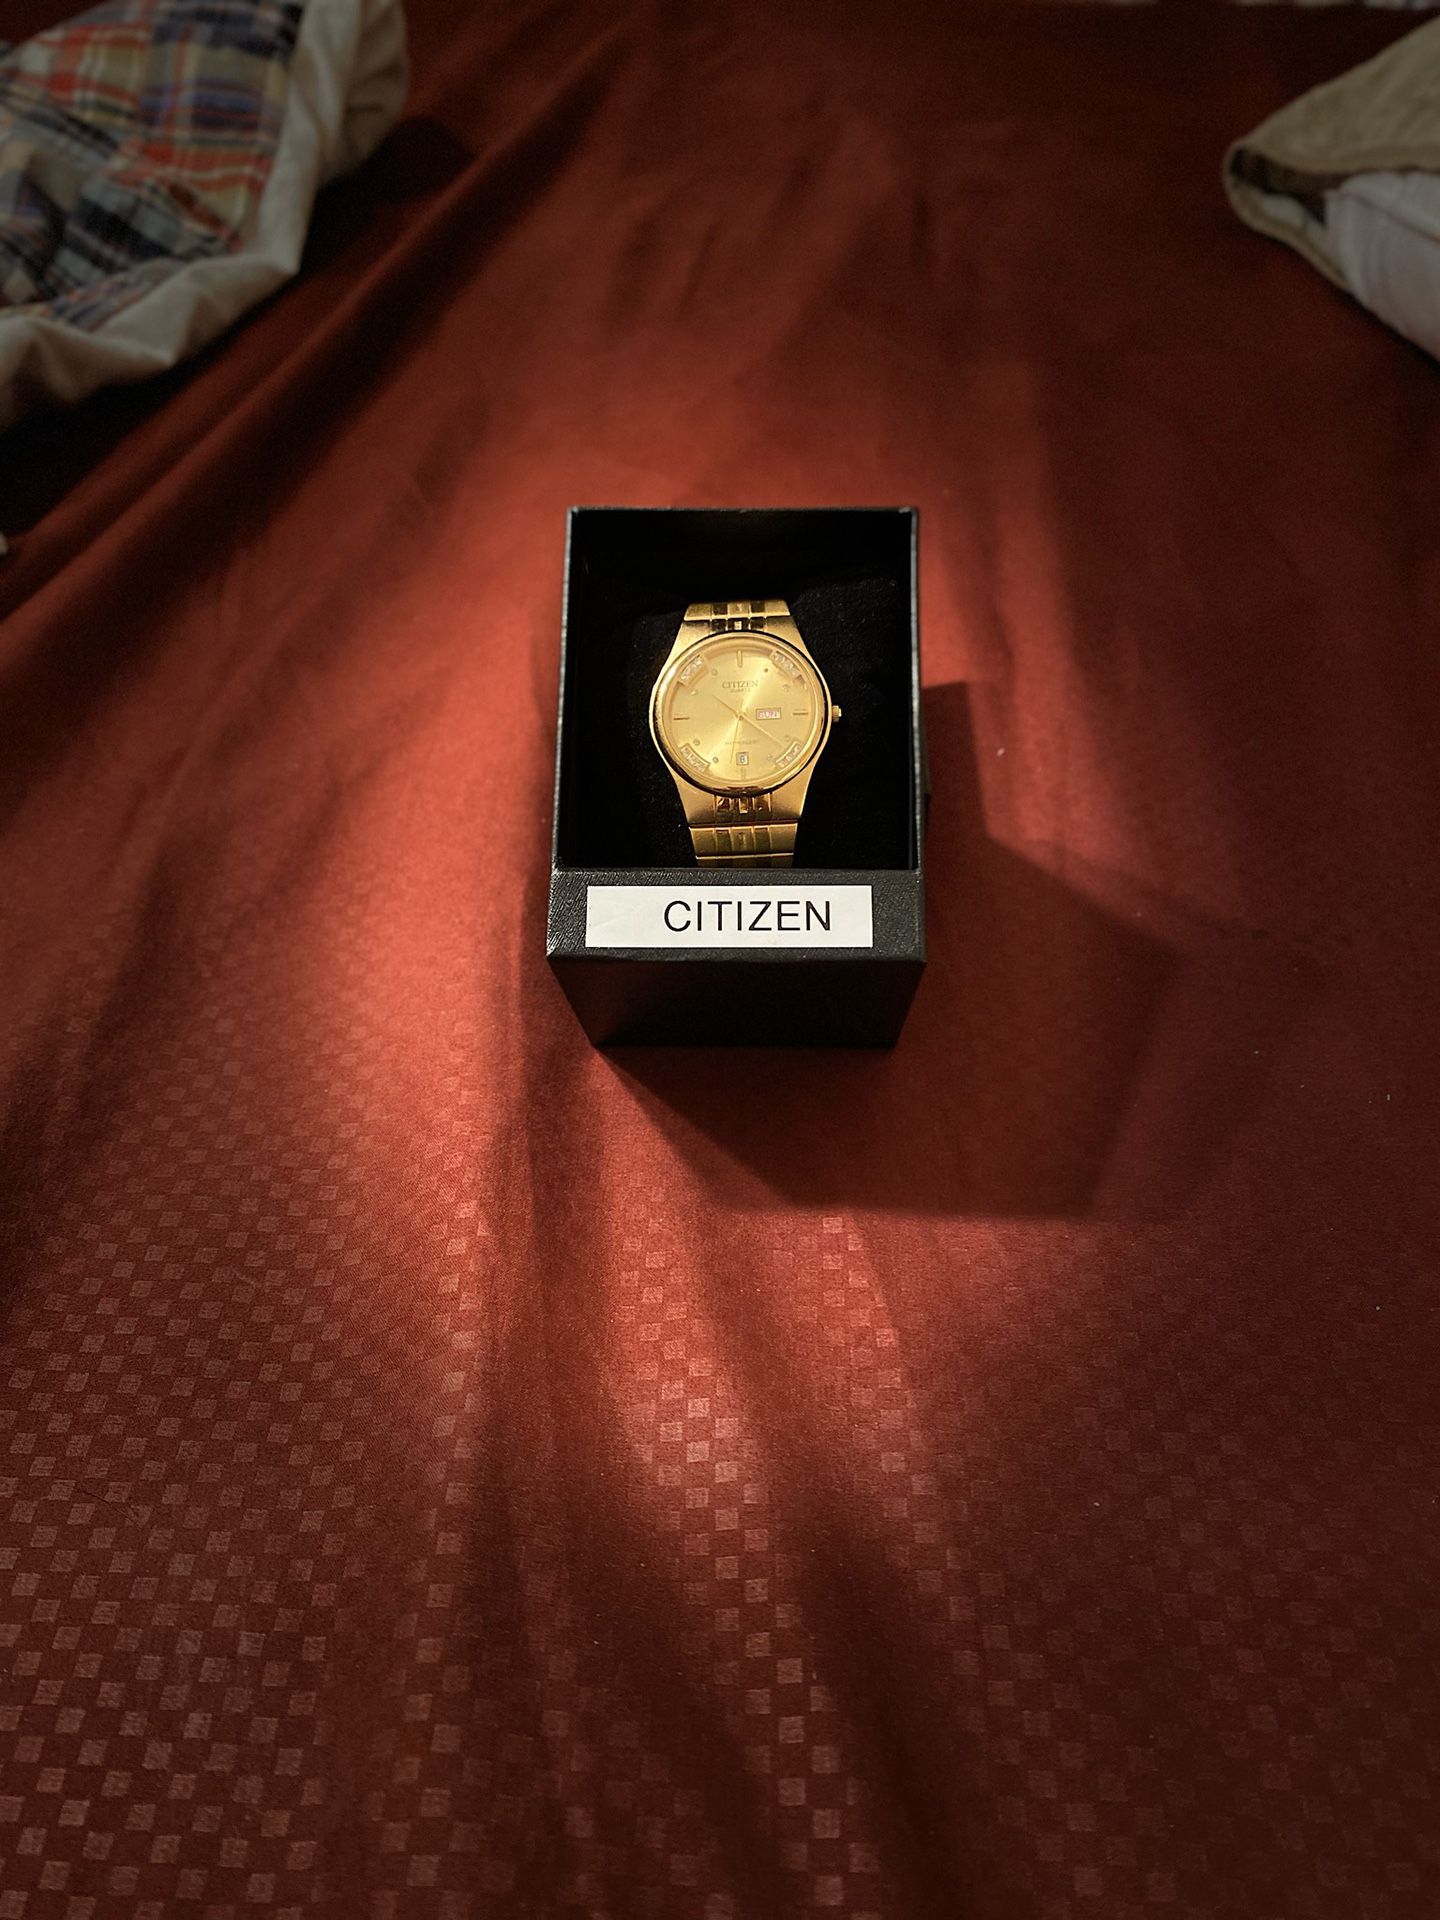 Antique Citizens unisex watch. Gold plated with 9 diamond inlays